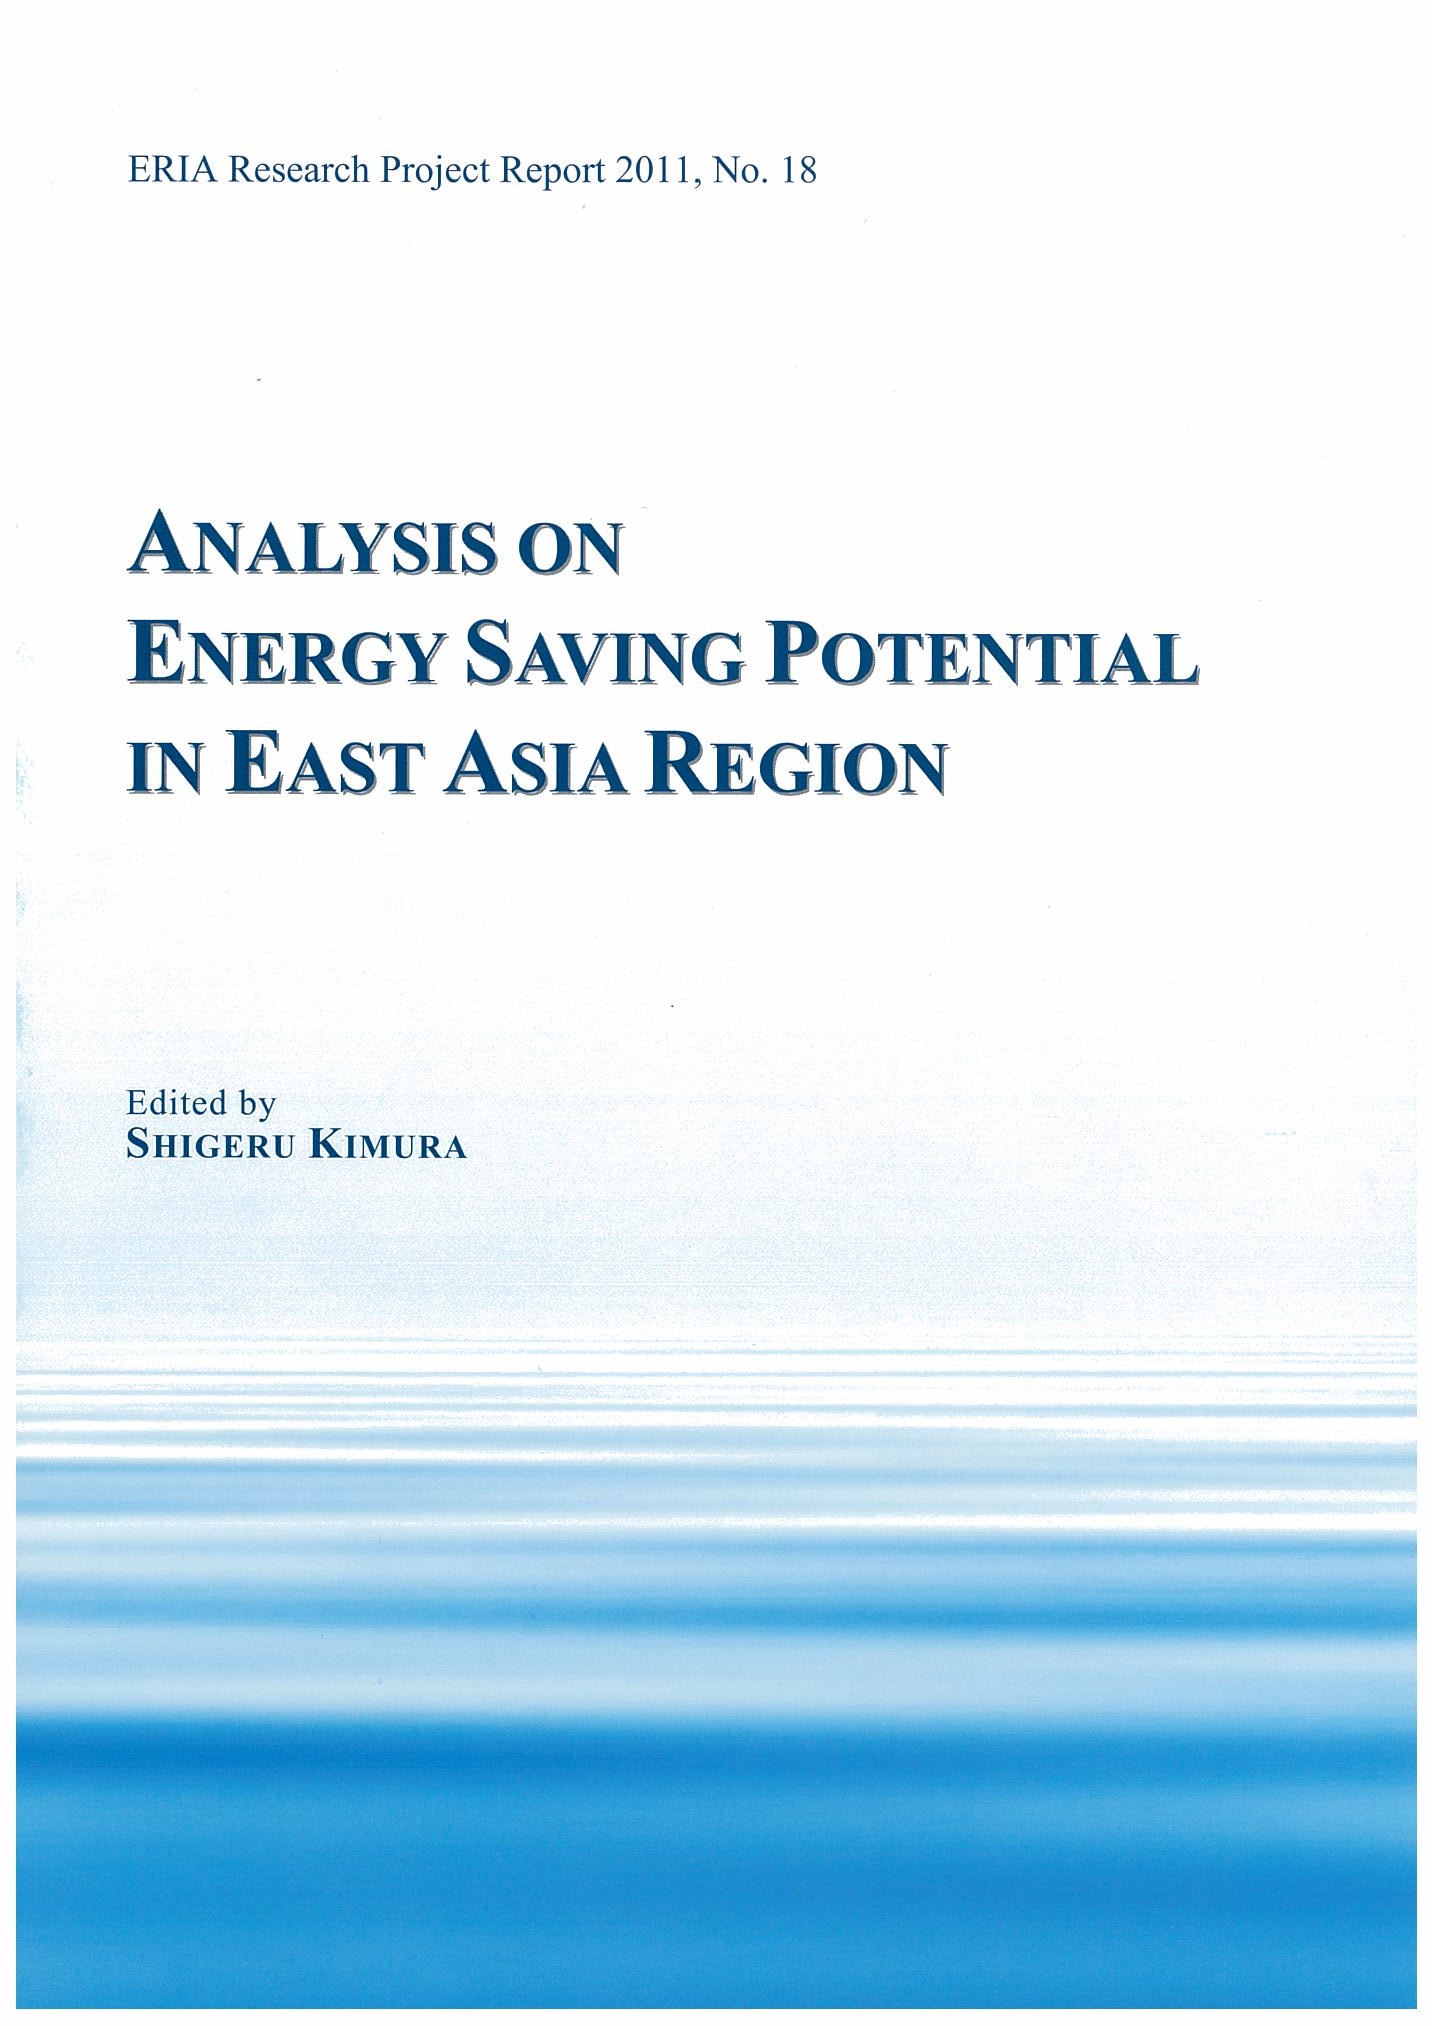 Analysis on Energy Saving Potential in East Asia Region (FY2011)